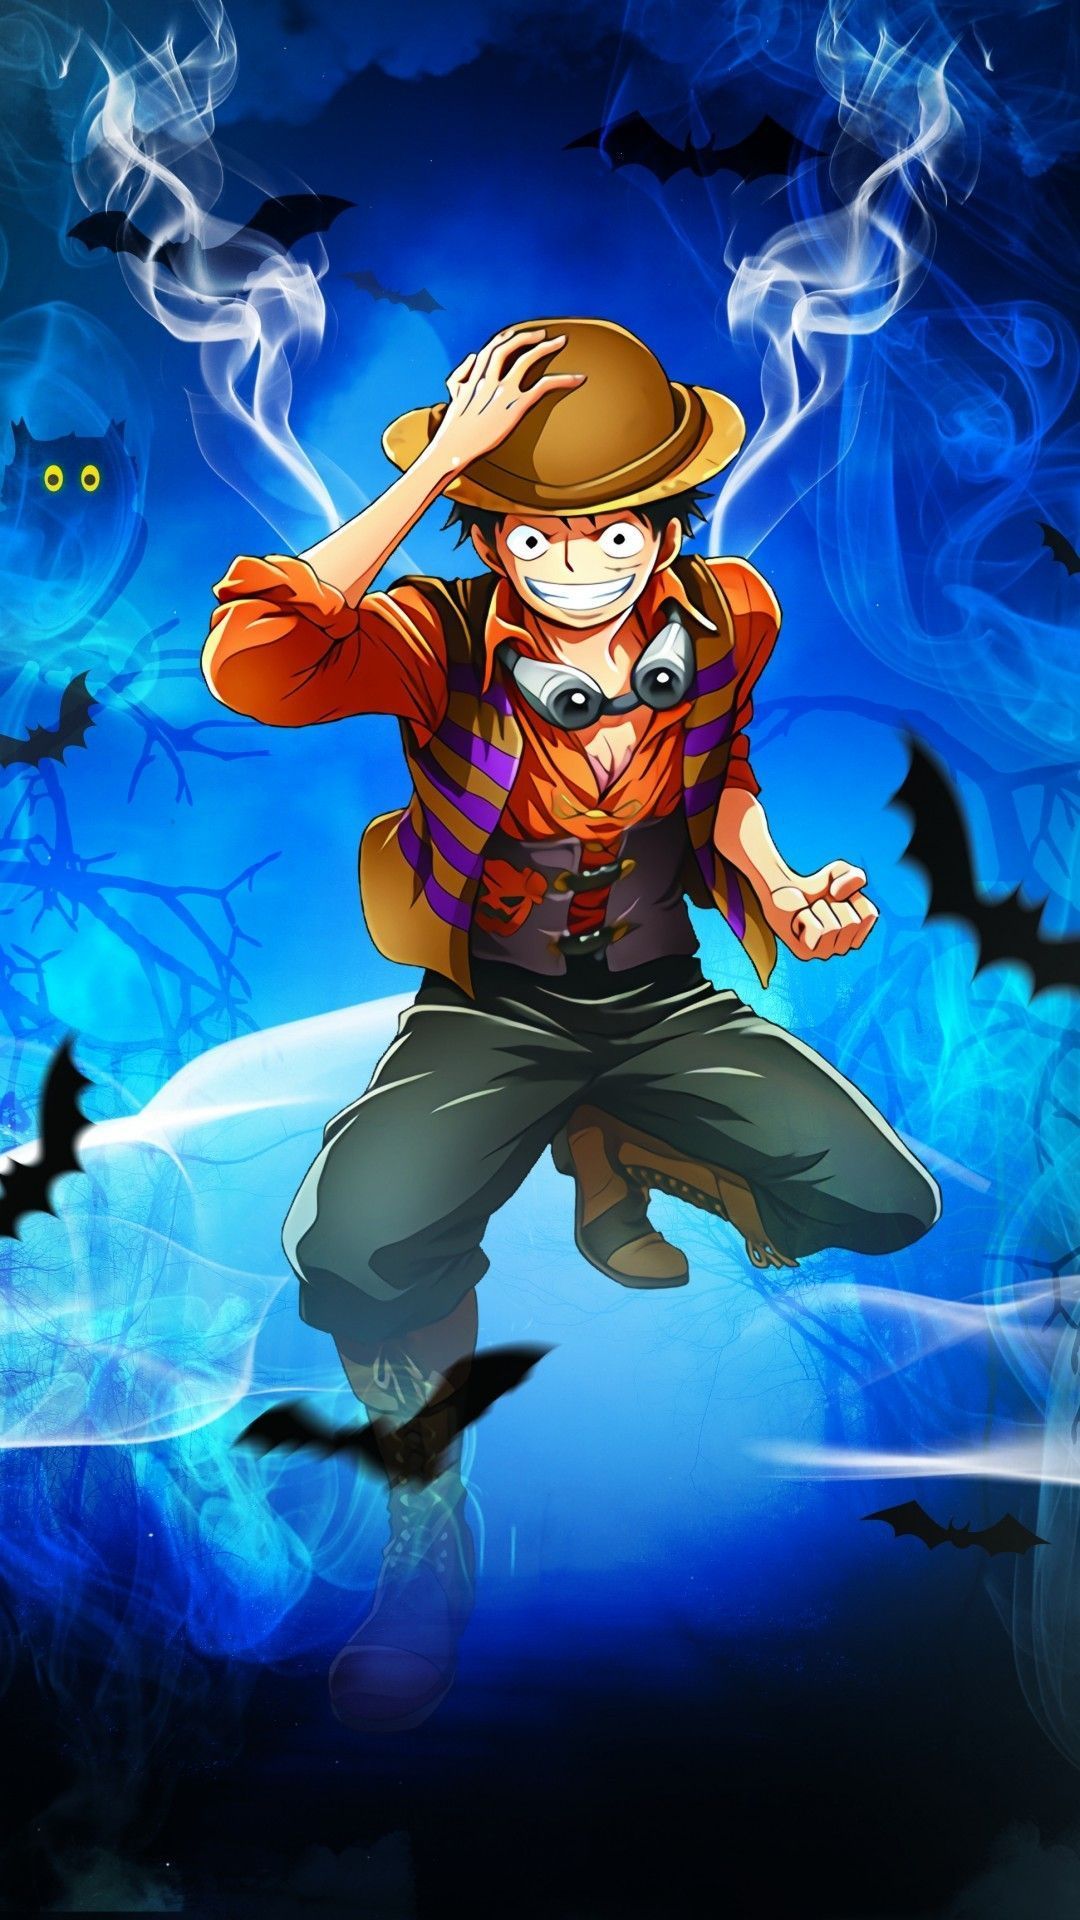 List of Awesome Anime Wallpaper IPhone 7 Plus Monkey D. Luffy, Straw Hat Pirates, One Piece,. Anime, One piece, Hình ảnh